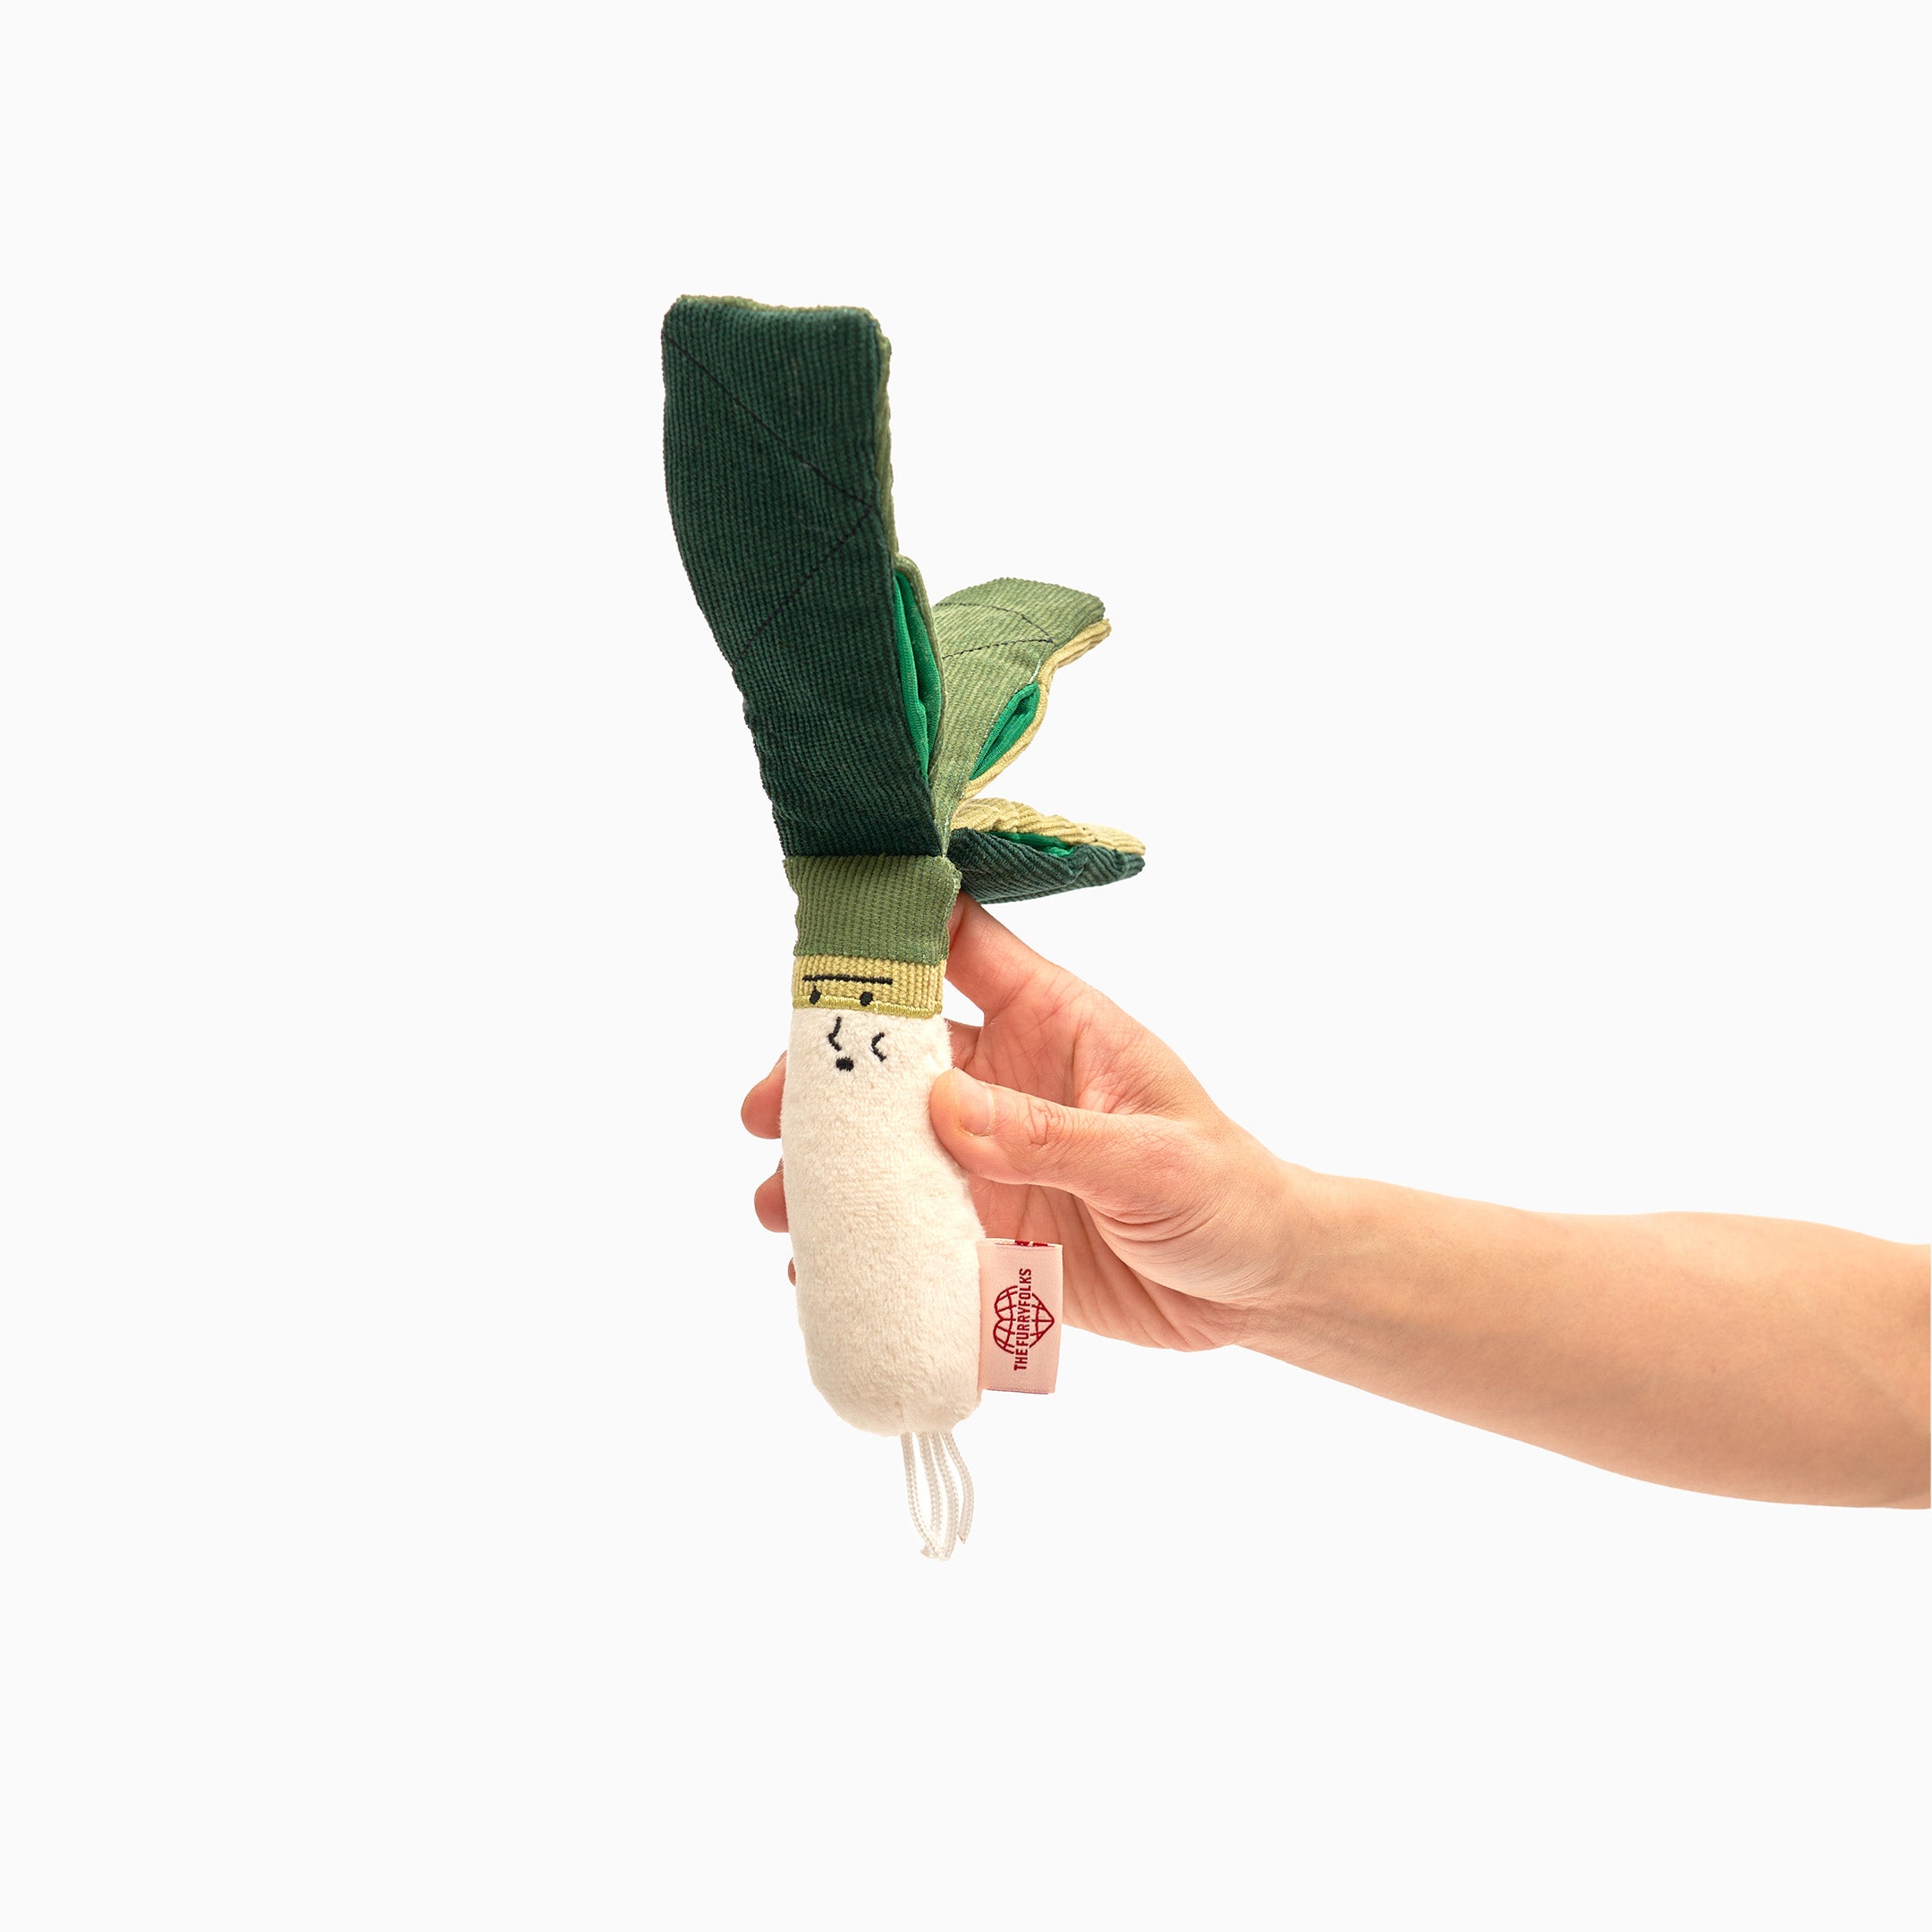 Hand holding a charming green onion dog nosework toy with a smiling face, designed for interactive scent games and cognitive pet training, set against a clean background.